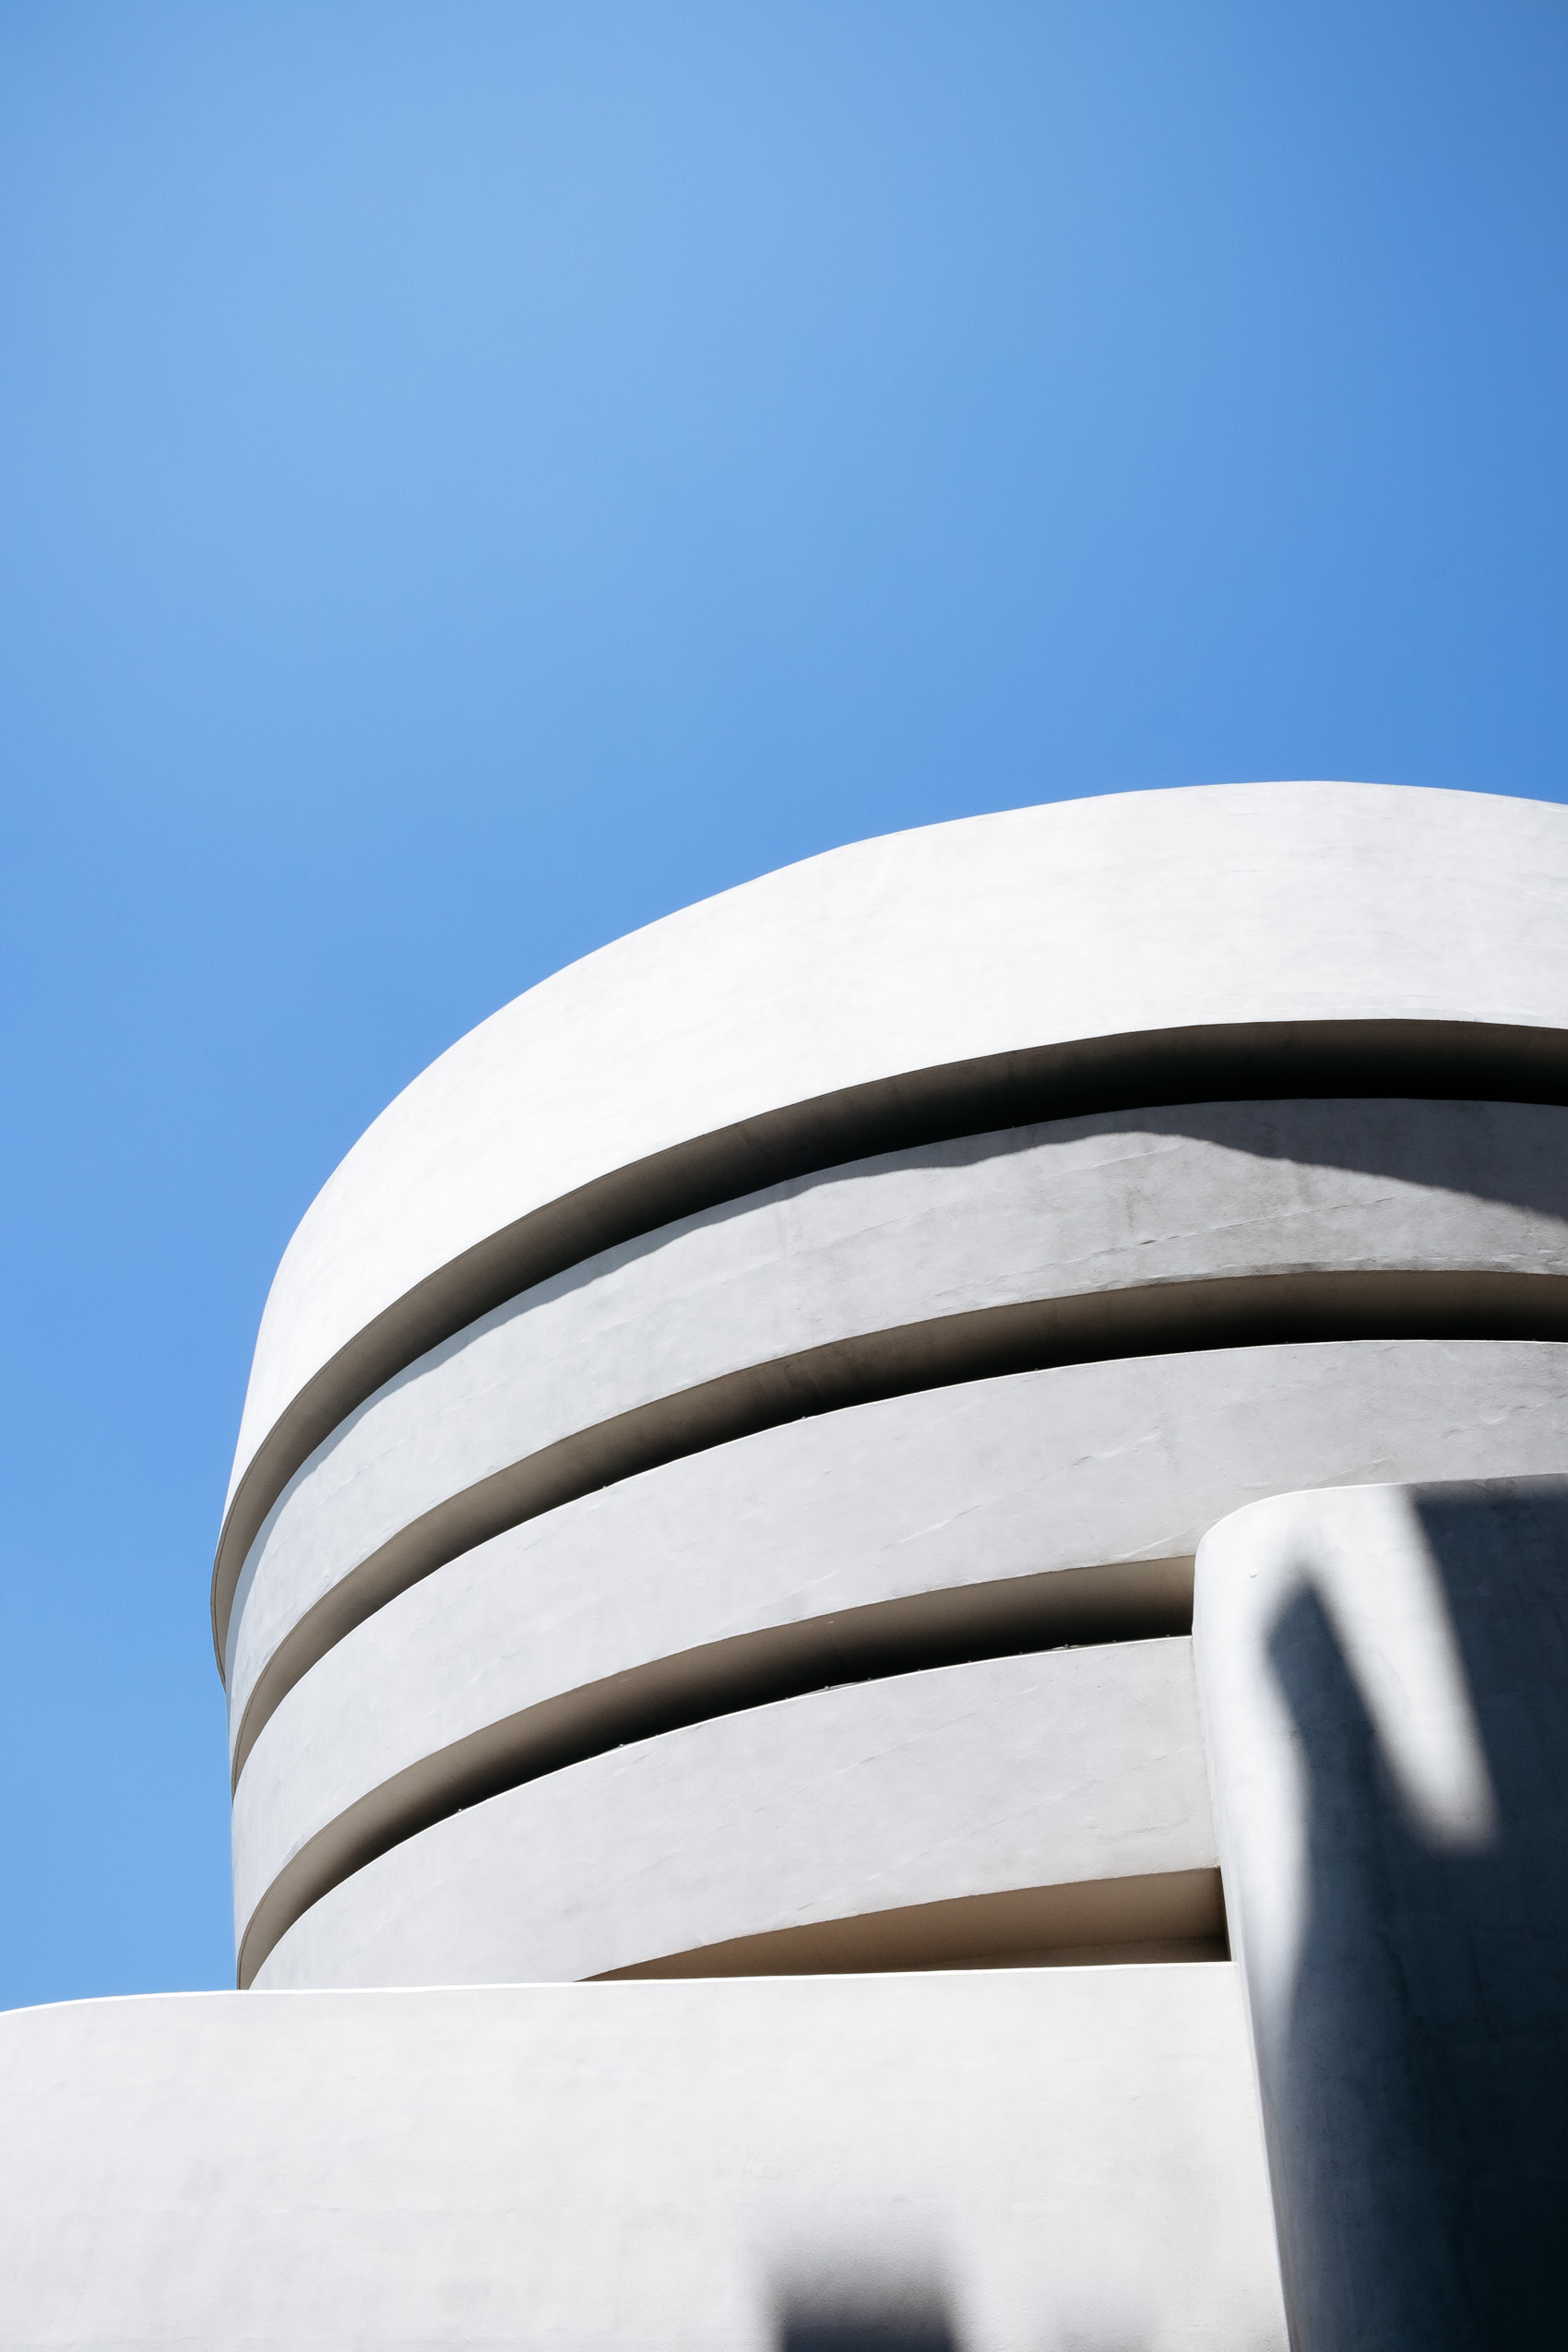 The Guggenheim Museum in New York by Frank Lloyd Wright